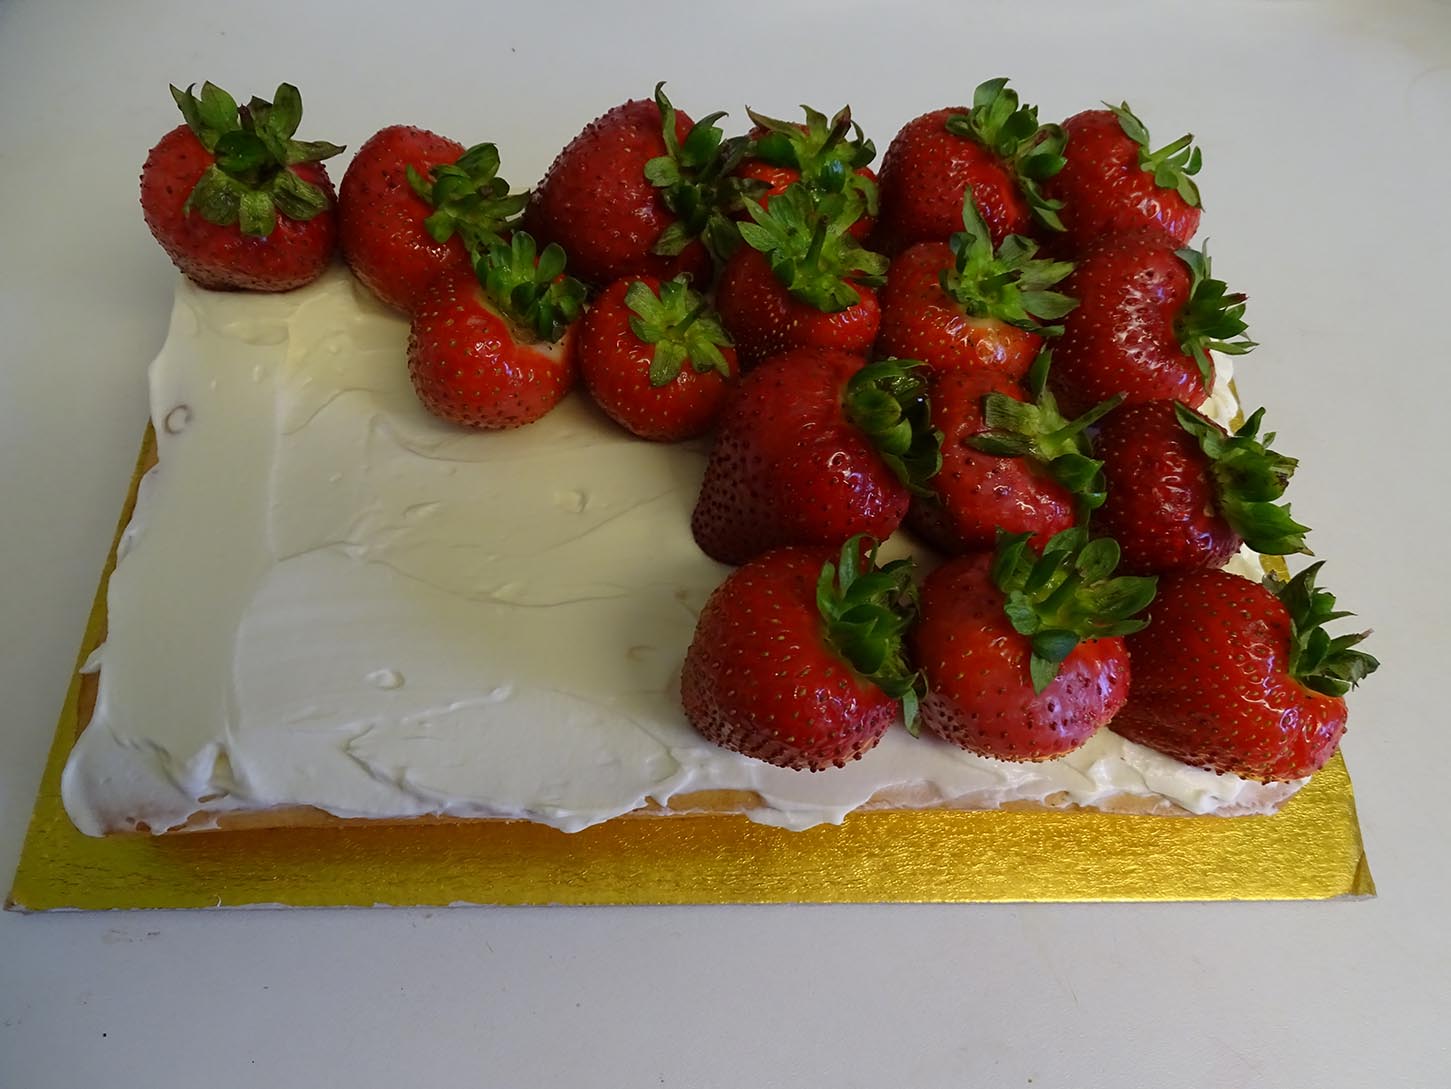 Day 11 of 30 days with Strawberry: Decorate a traybake ...